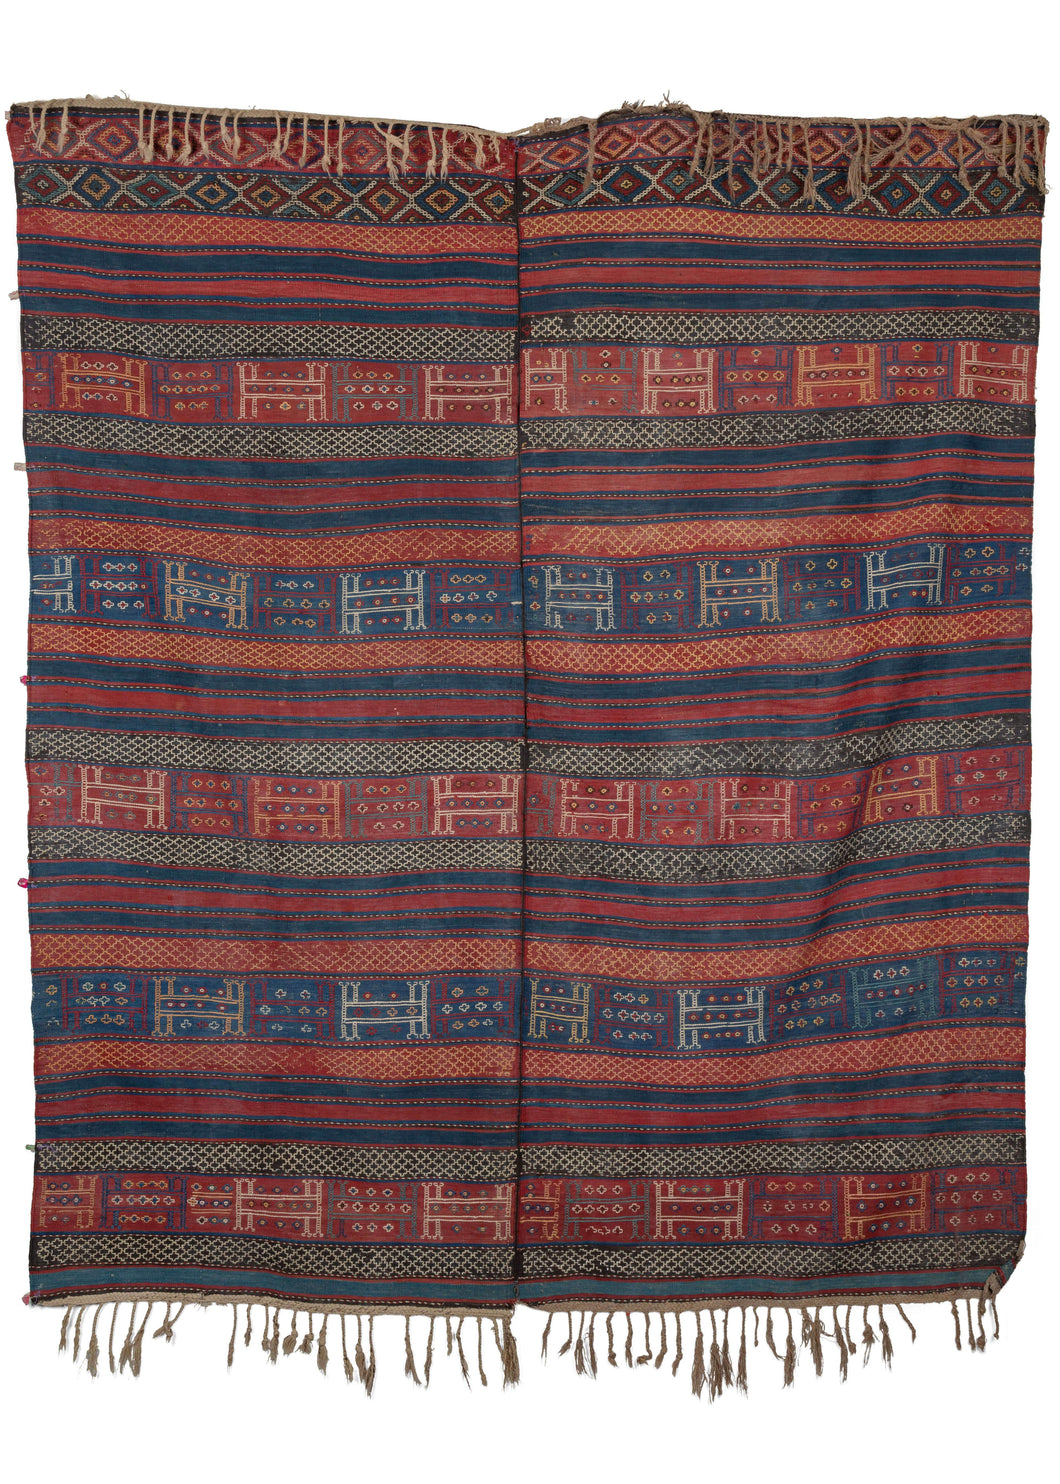 Antique Caucasian Verneh weaver's kilim woven in two strips seamed in the center it features bold kilim stripes of blue and red with an over-lapping soumak pattering in yellows, blues, red and white. 